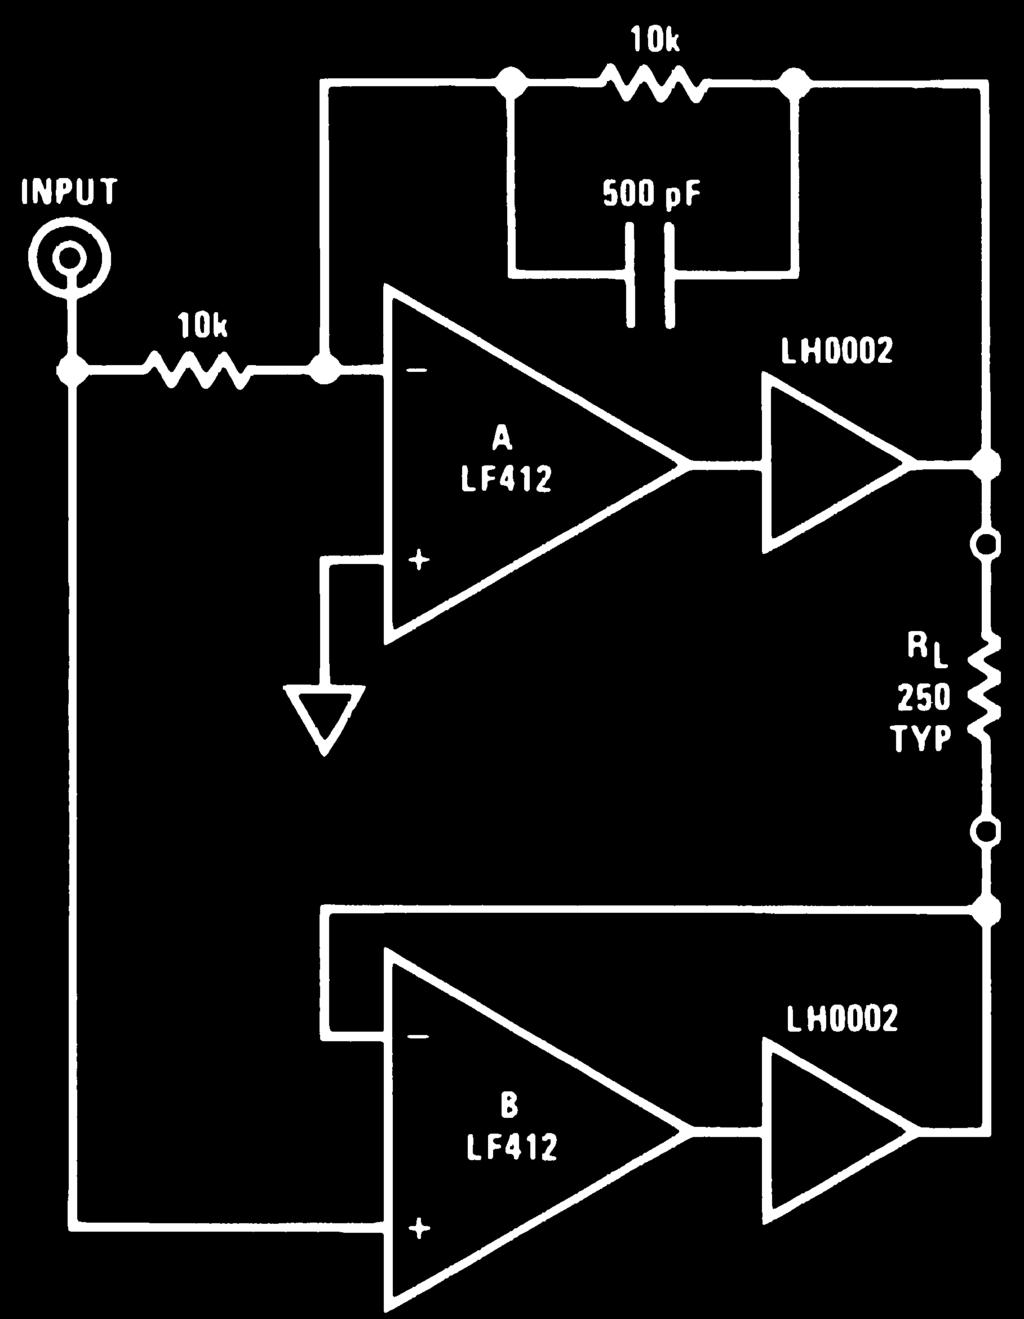 The circuit of Figure 5 shows a simple way to effectively double the voltage swing across a load by stacking or bridging amplifier outputs.